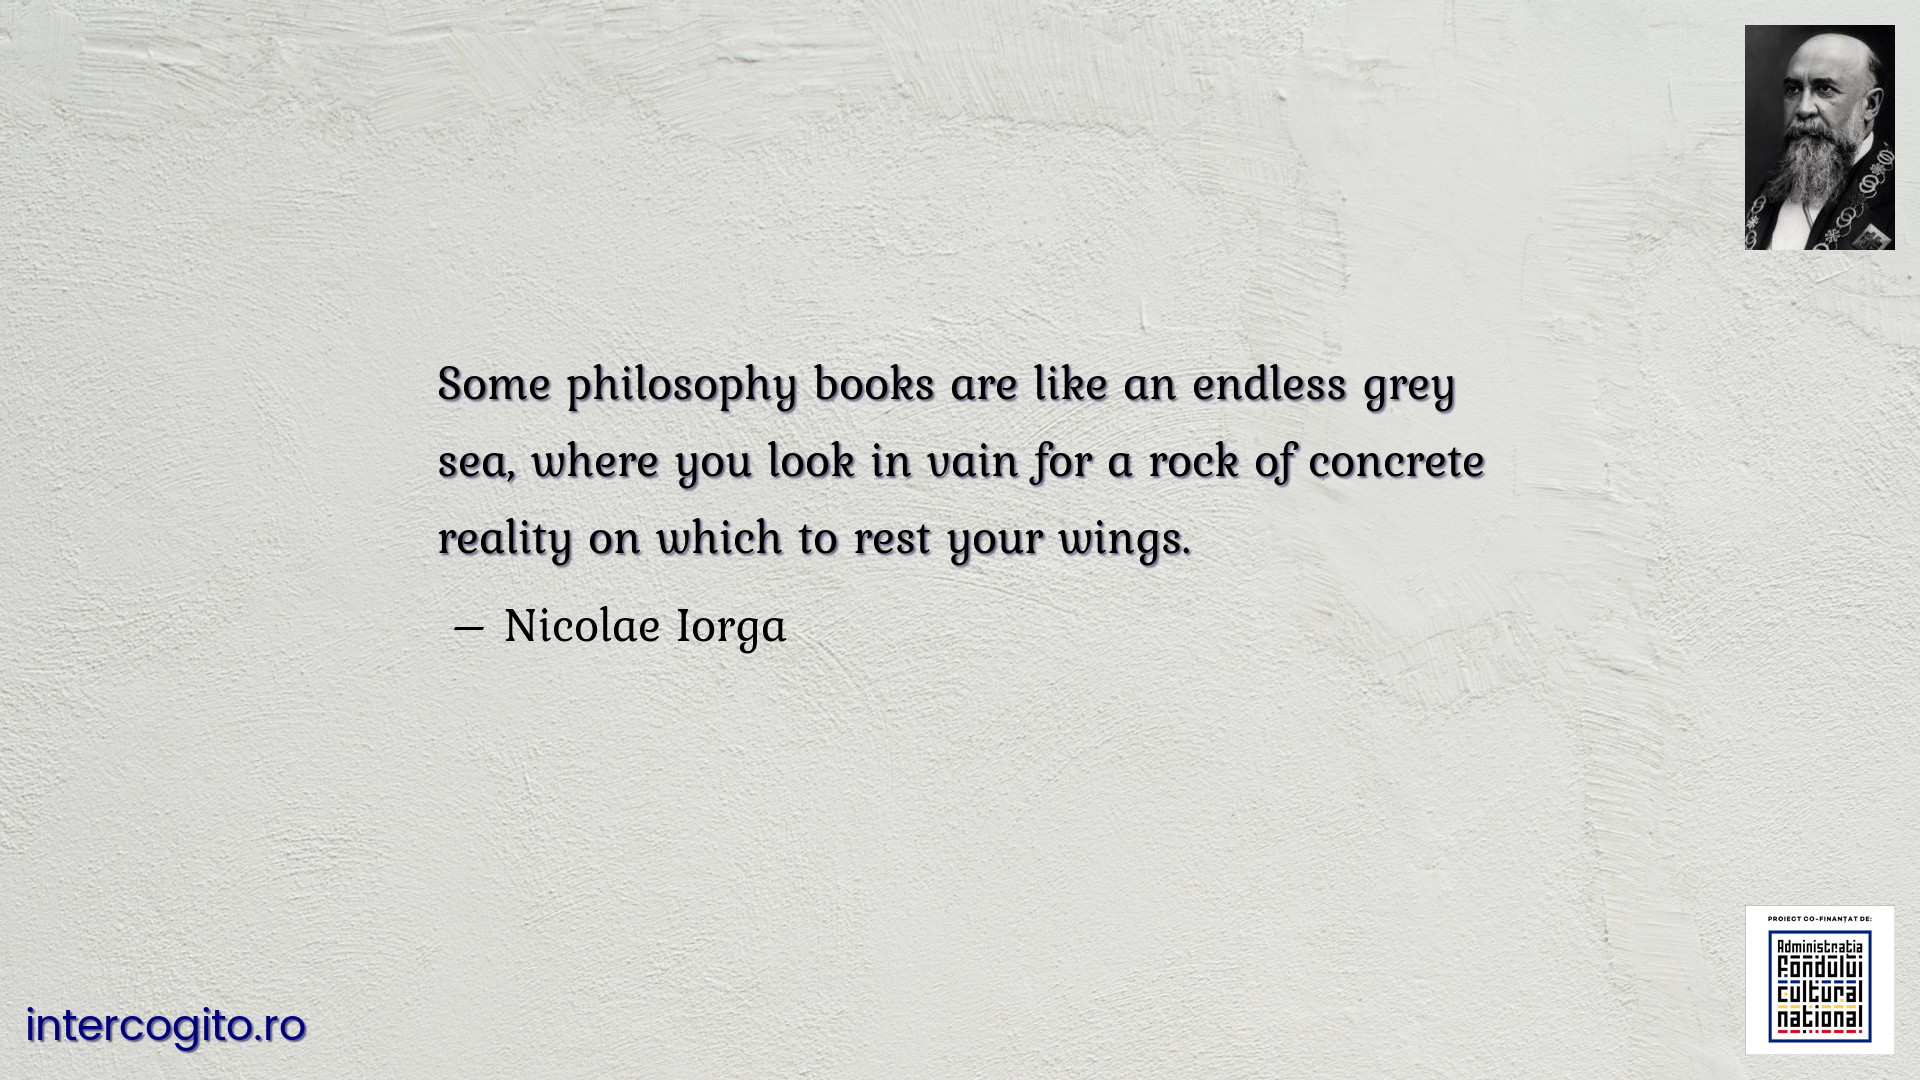 Some philosophy books are like an endless grey sea, where you look in vain for a rock of concrete reality on which to rest your wings.